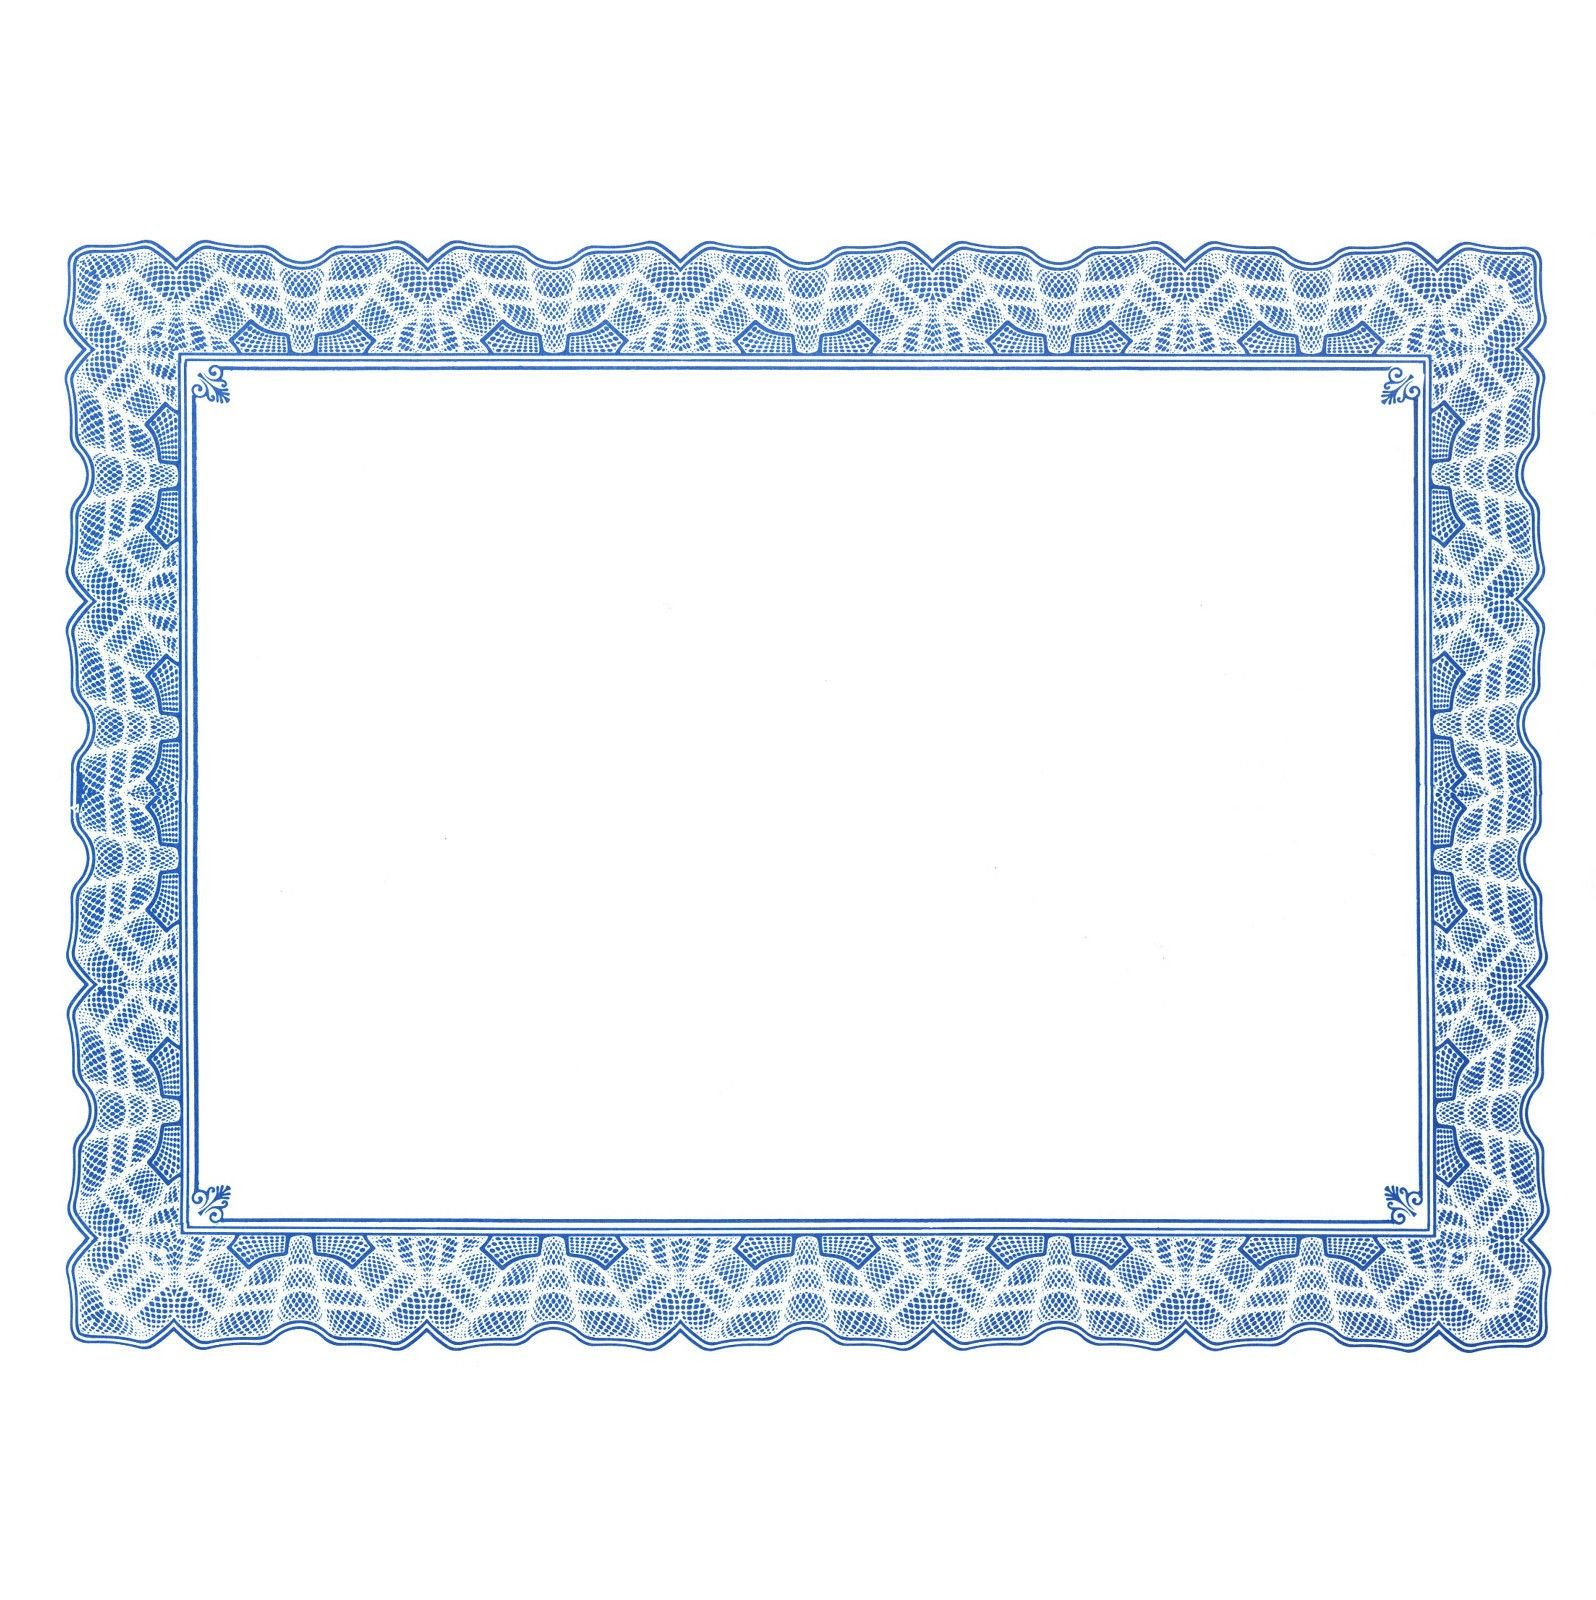 Free Certificate Border Templates For Word Inside Free Certificate Templates For Word 2007